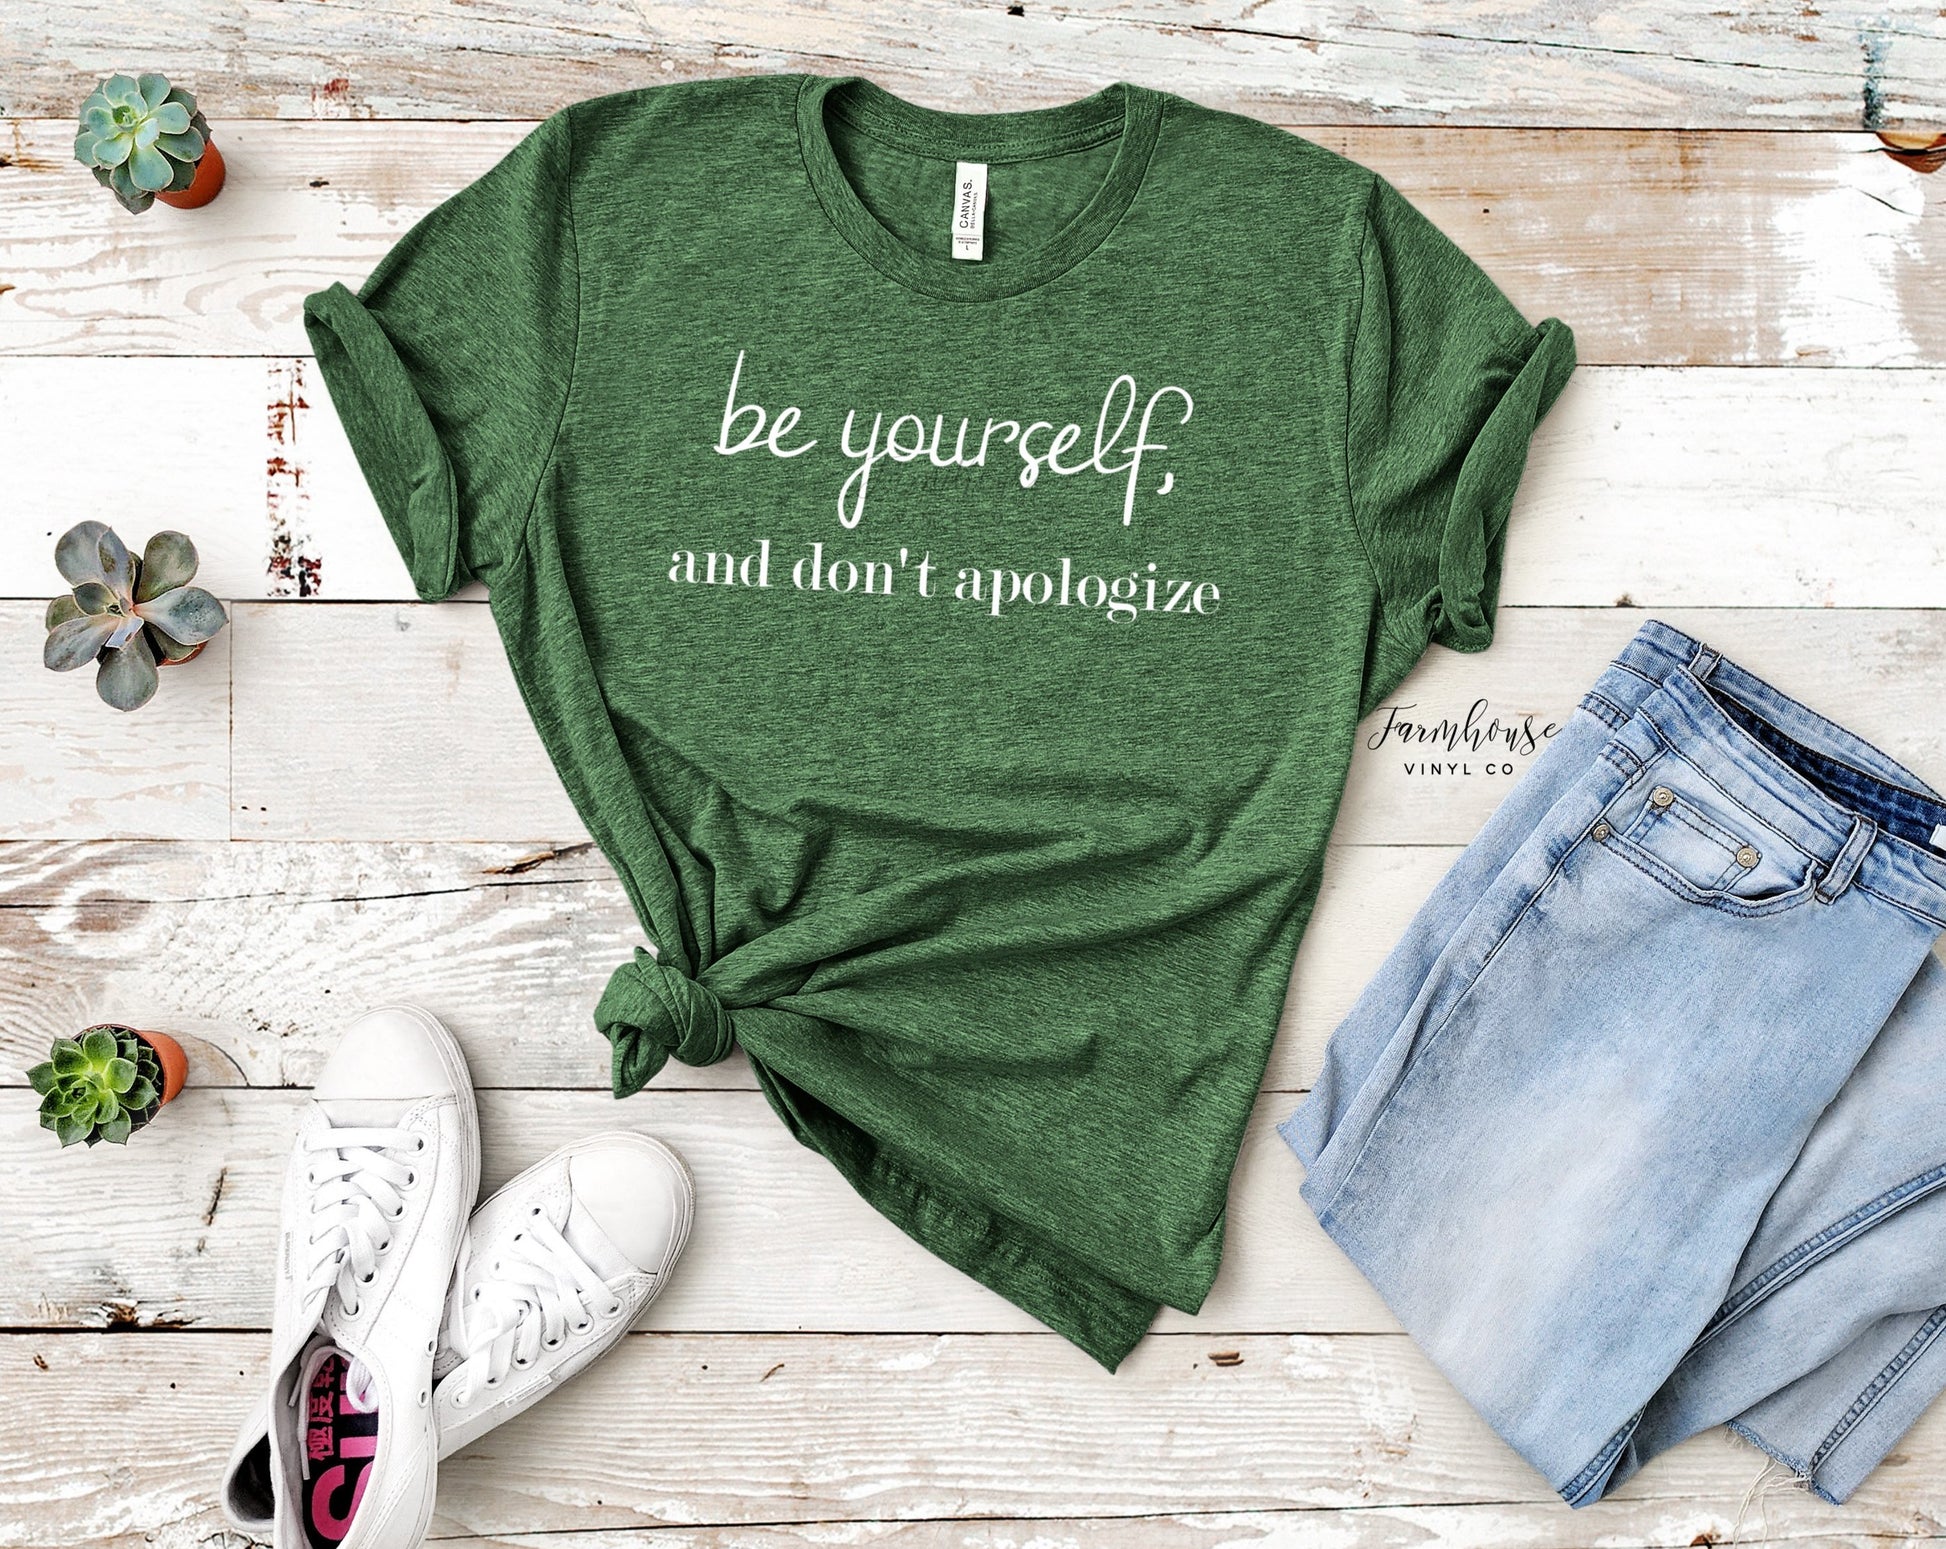 Be Yourself, and Don't Apologize Shirt - Farmhouse Vinyl Co